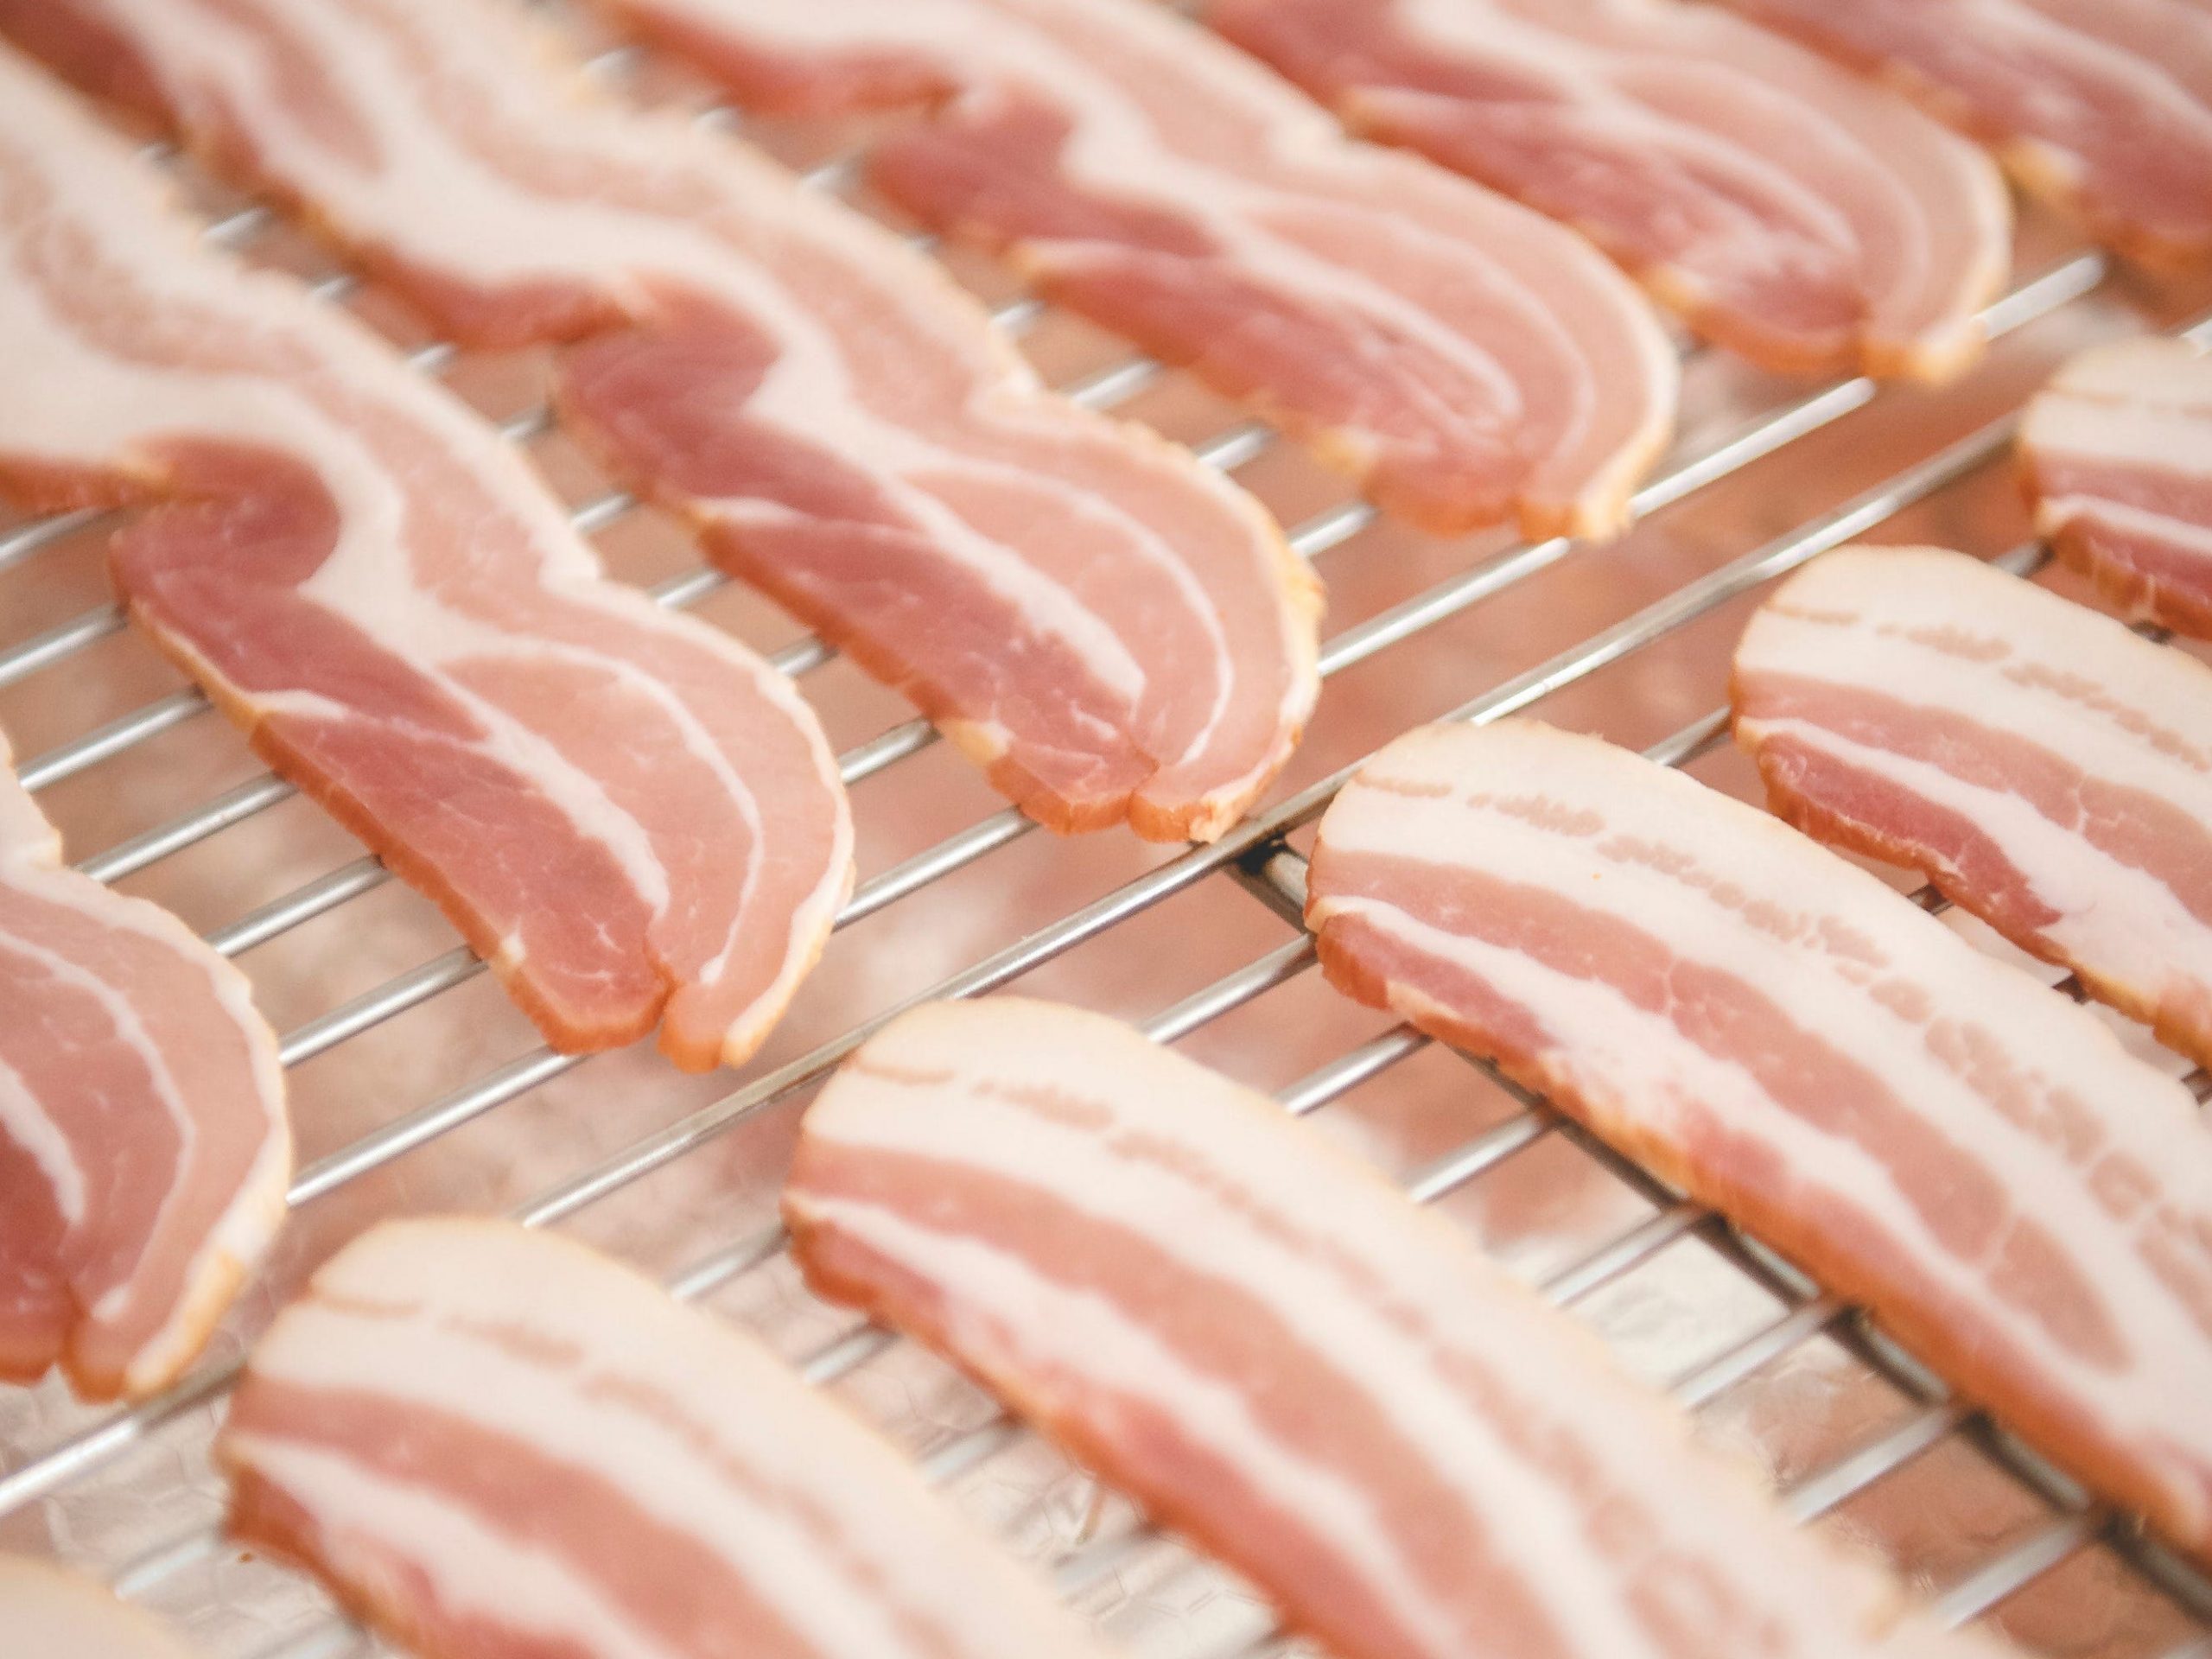 Strips of raw bacon laid out on a wire rack